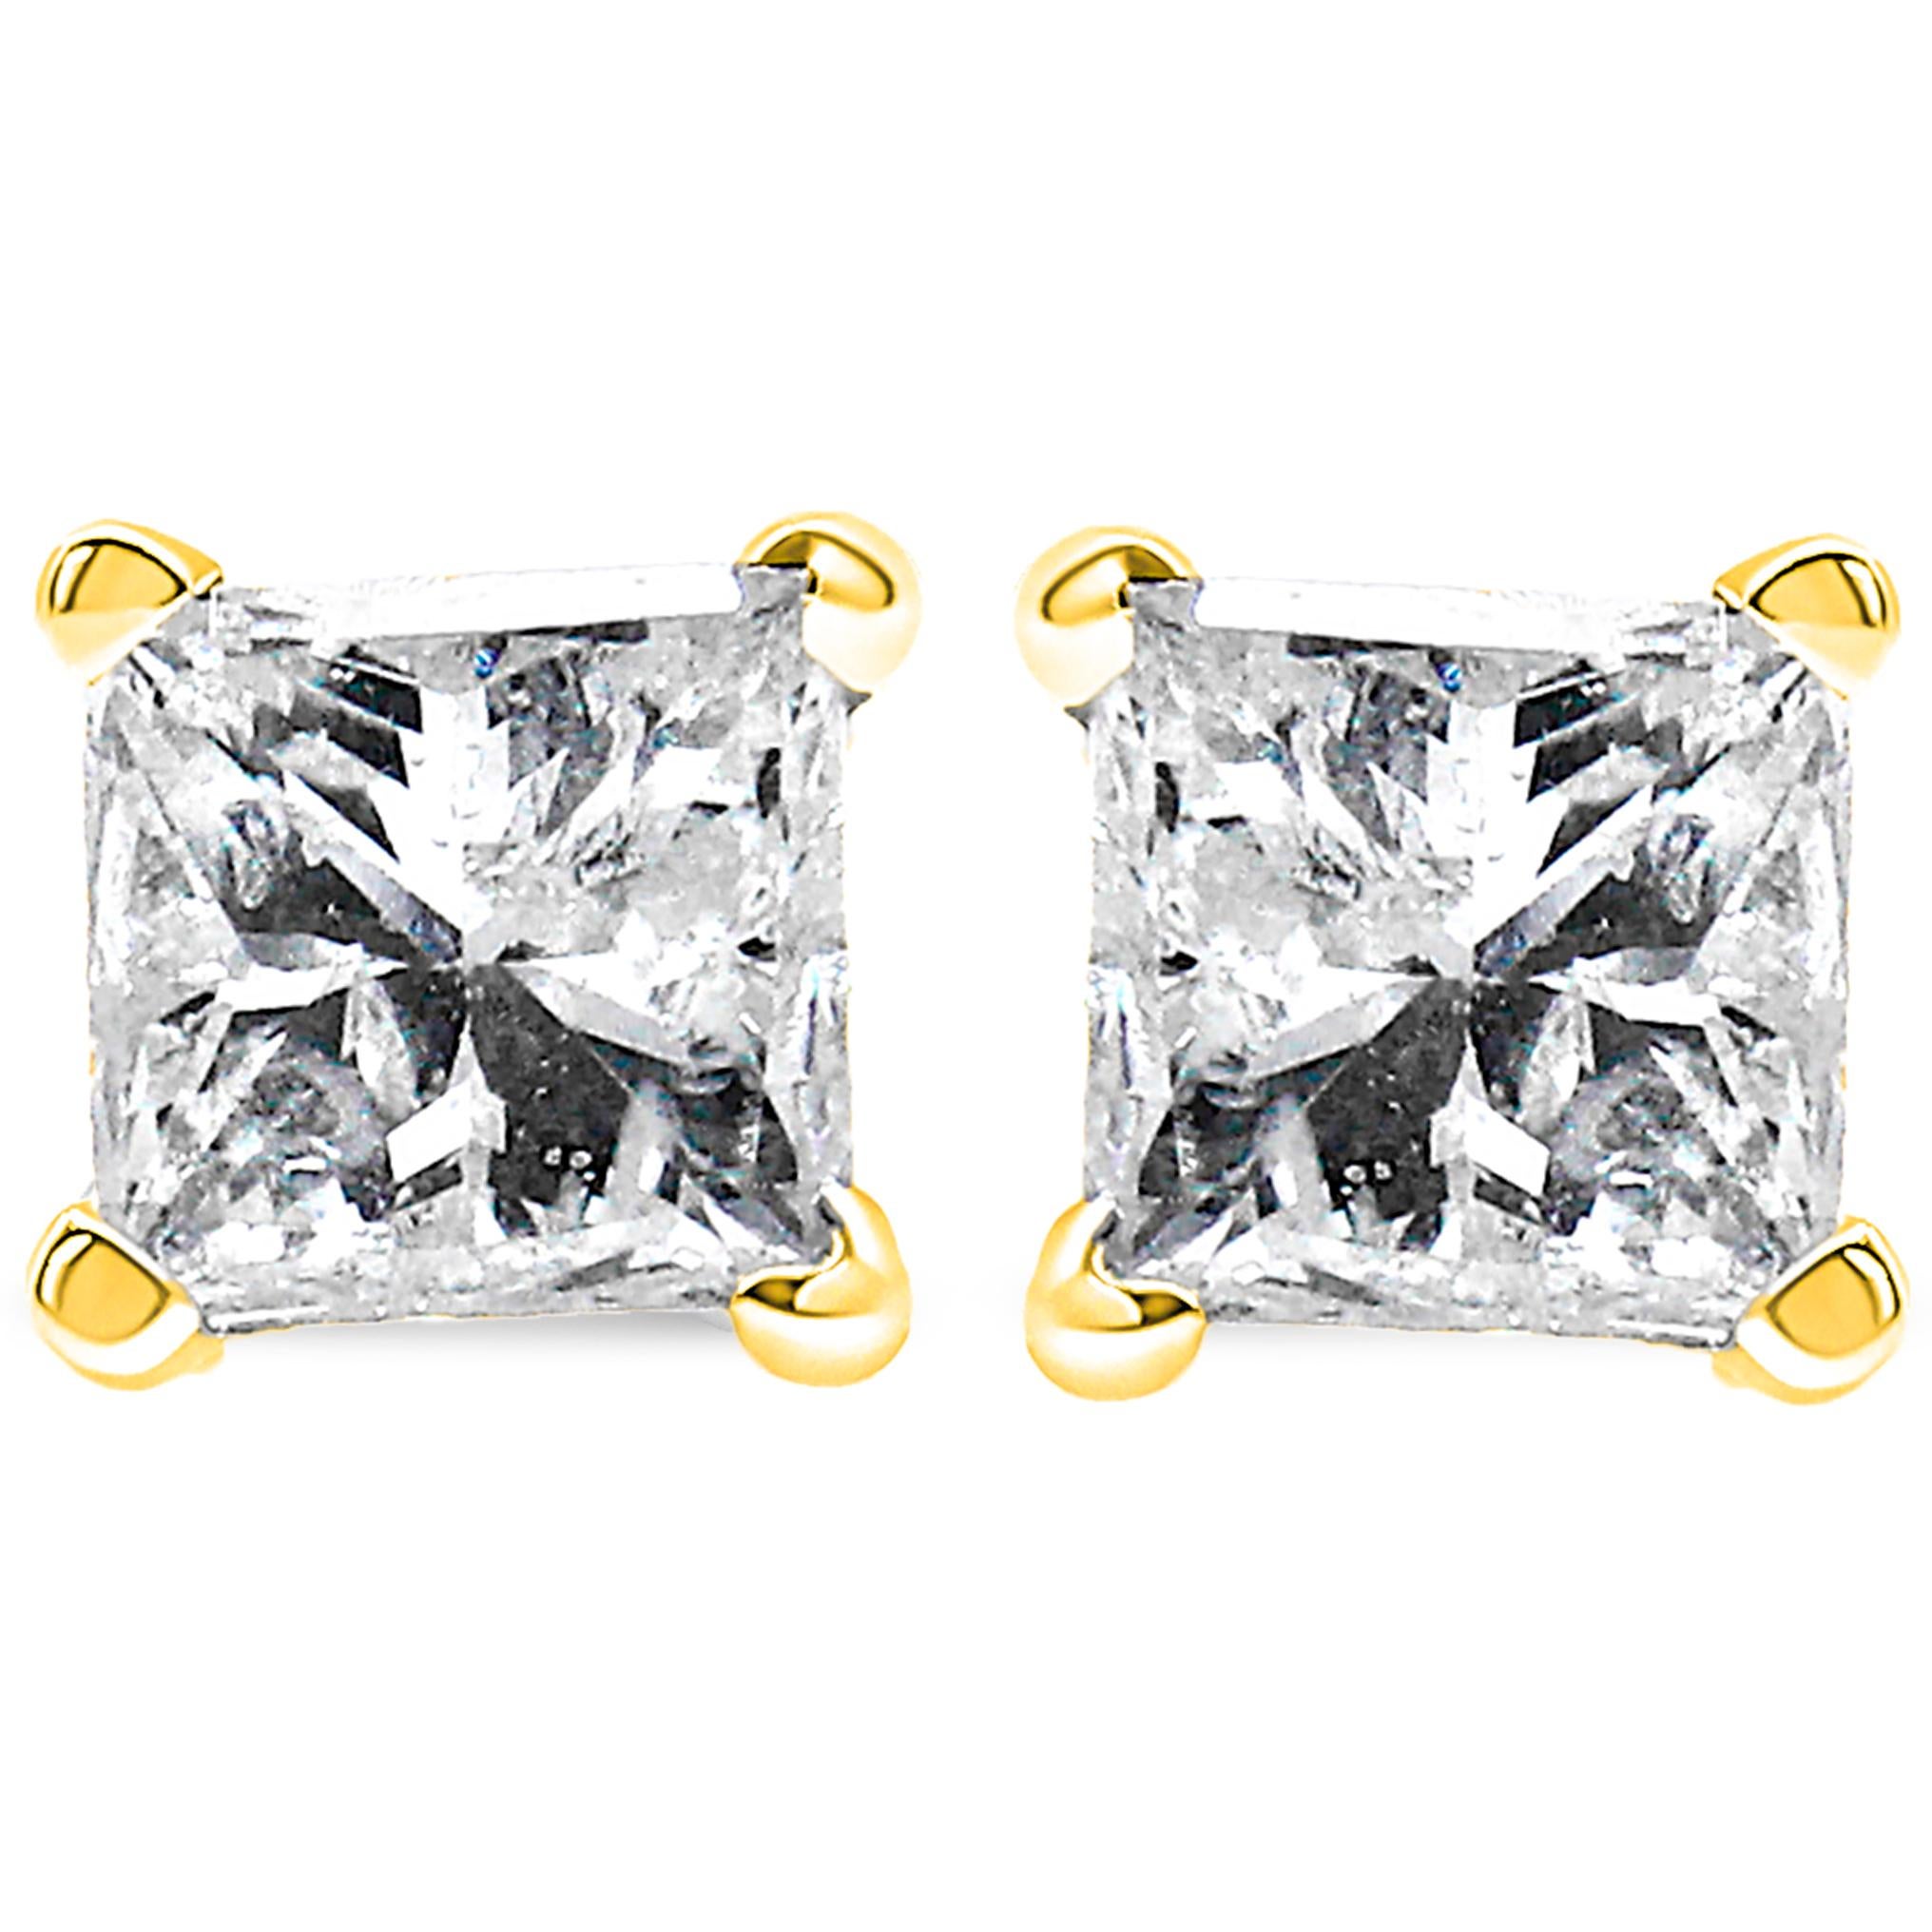 A delicate pair of classic diamond studs. Each earring boasts 1 princess cut diamond set in a prong setting. The total carat weight is 1/5. The diamonds are set in lustrous 14k yellow gold. Earrings come with a push back mechanism.
Each genuine